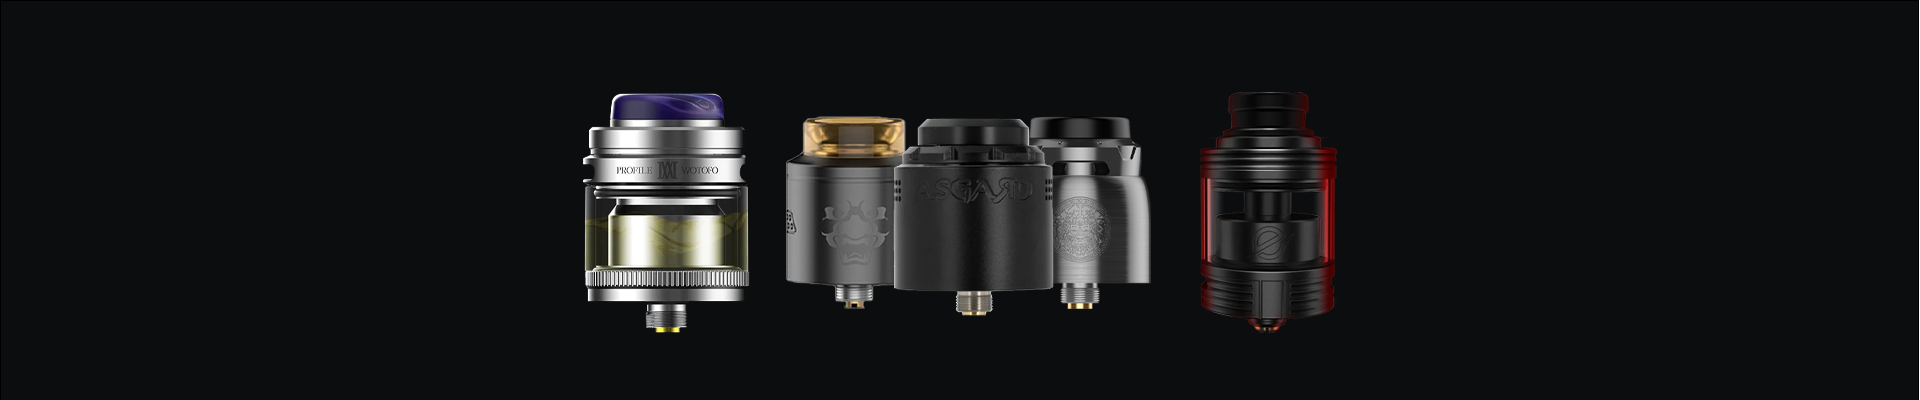 Atomizers - Huge Collection of RTA, RDA and Sub Ohm Tanks